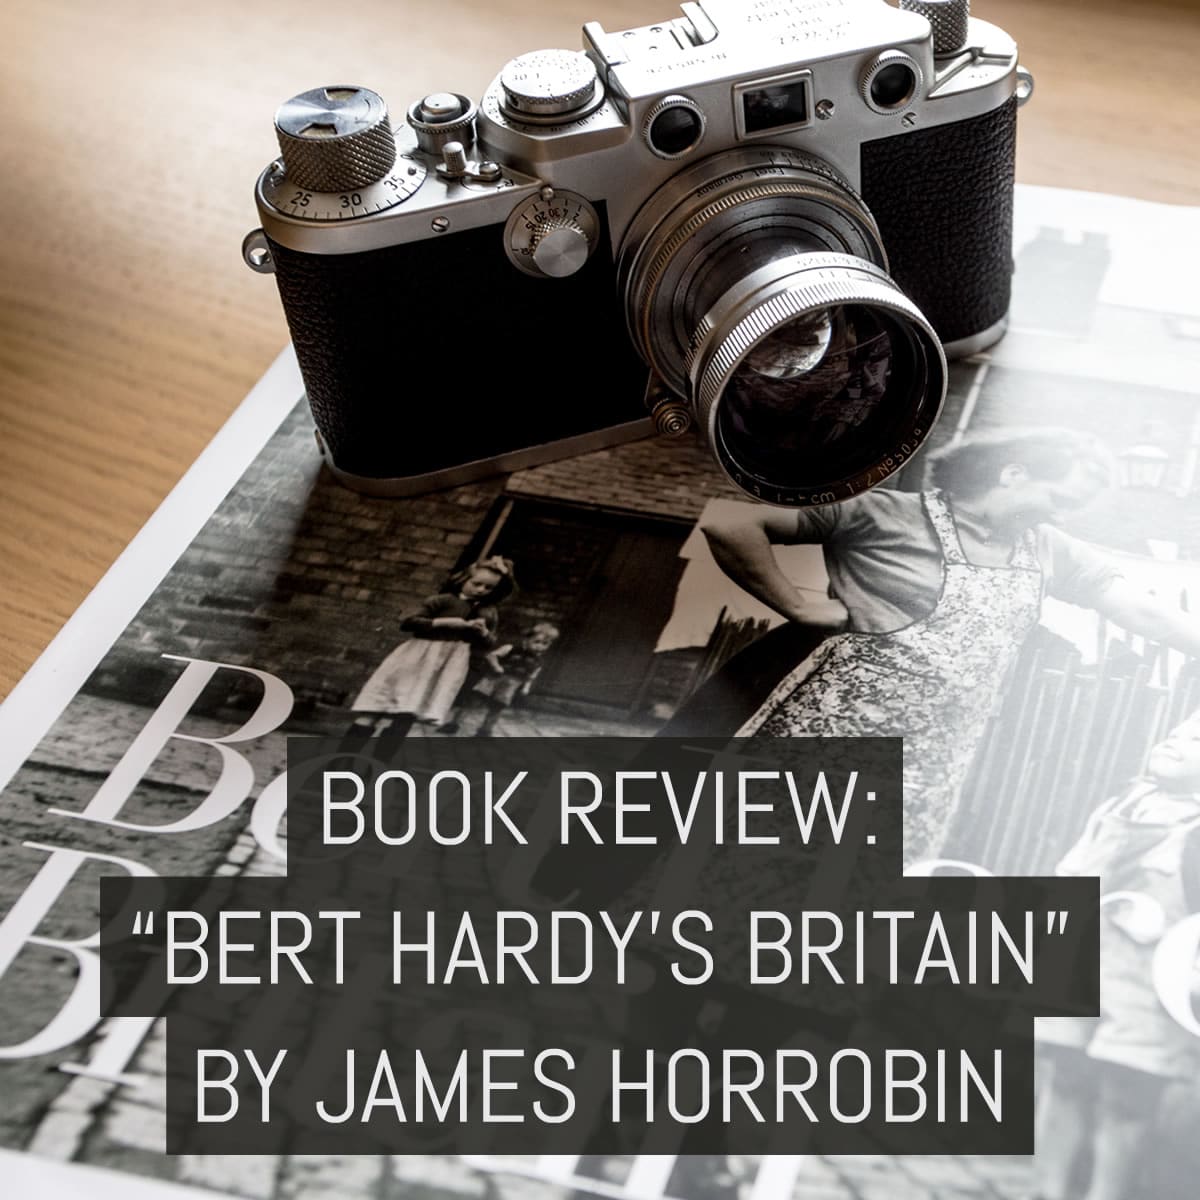 Cover - Book review- “Bert Hardy’s Britain” - by James Horrobin